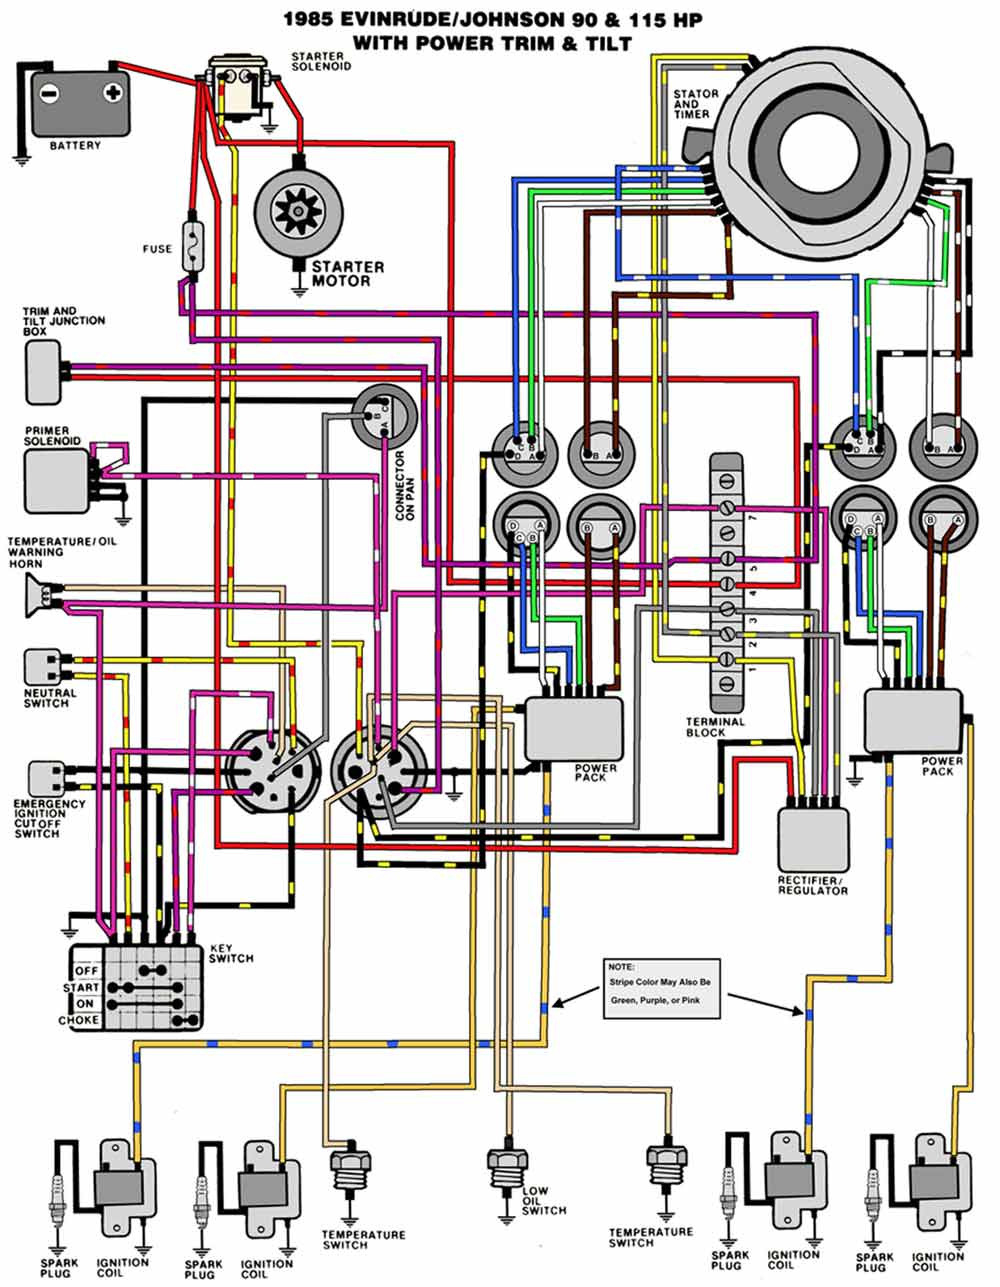 1988 Johnson Outboard Wiring Harness - Free Wiring Diagram For You • - Johnson Outboard Wiring Diagram Pdf